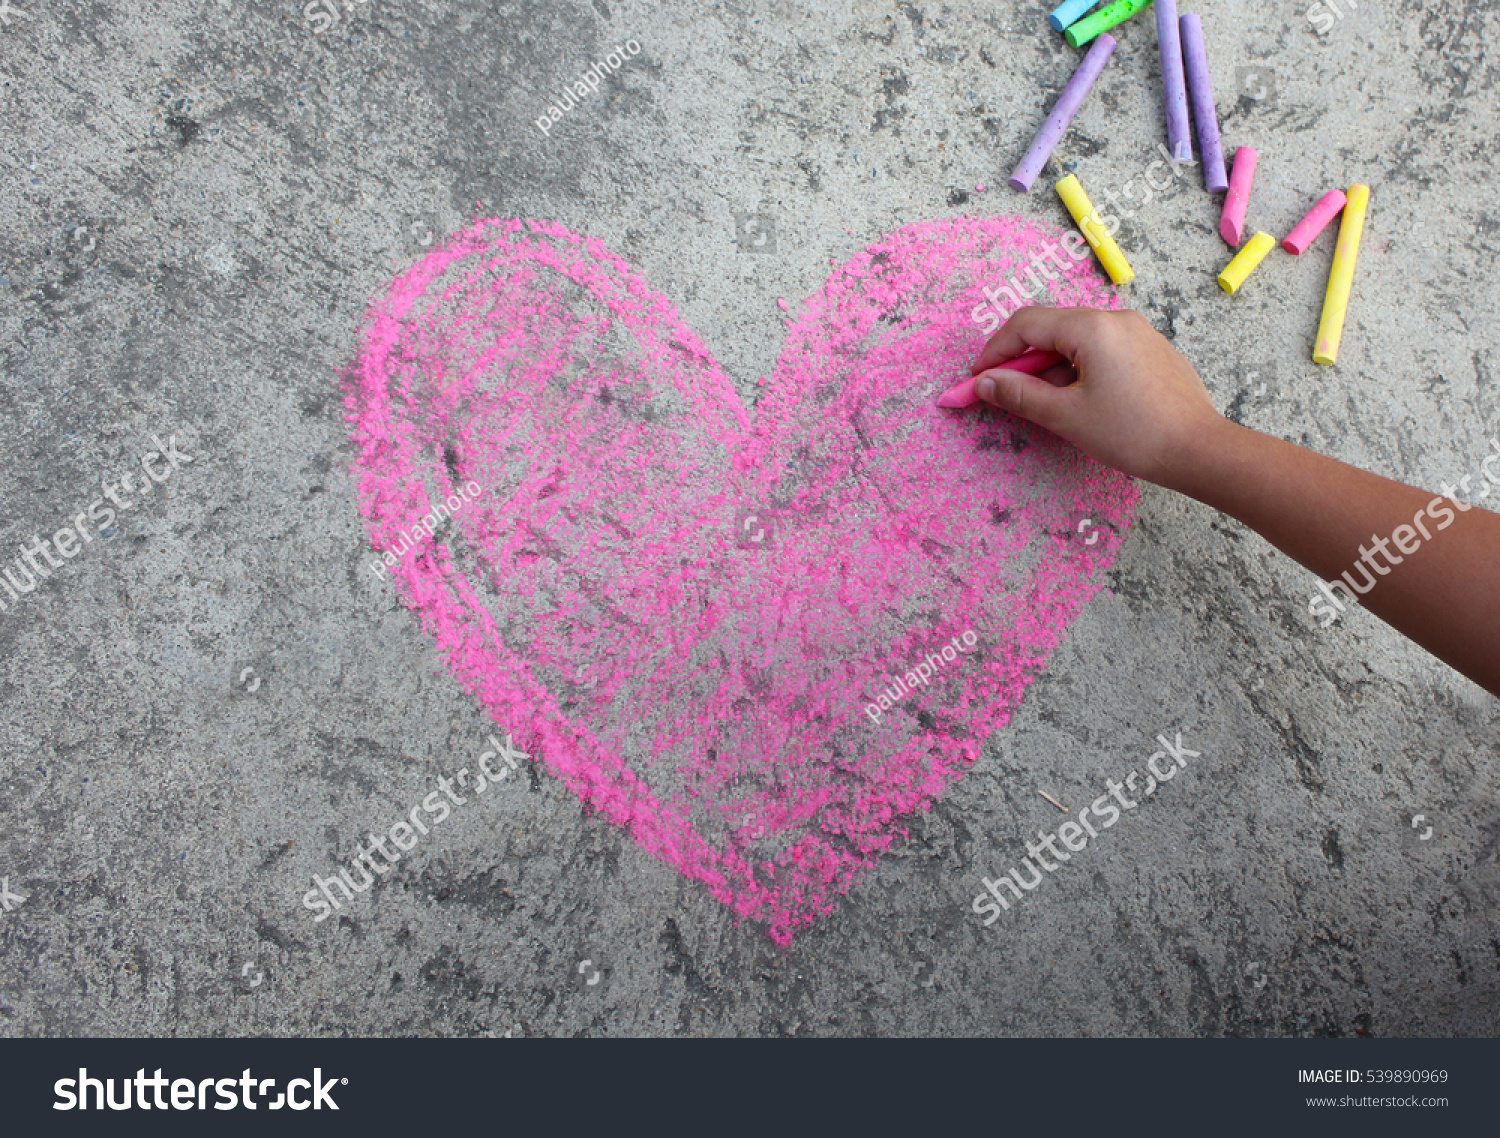  pink heart symbol is drawn on a sidewalk outside with chalk #539890969